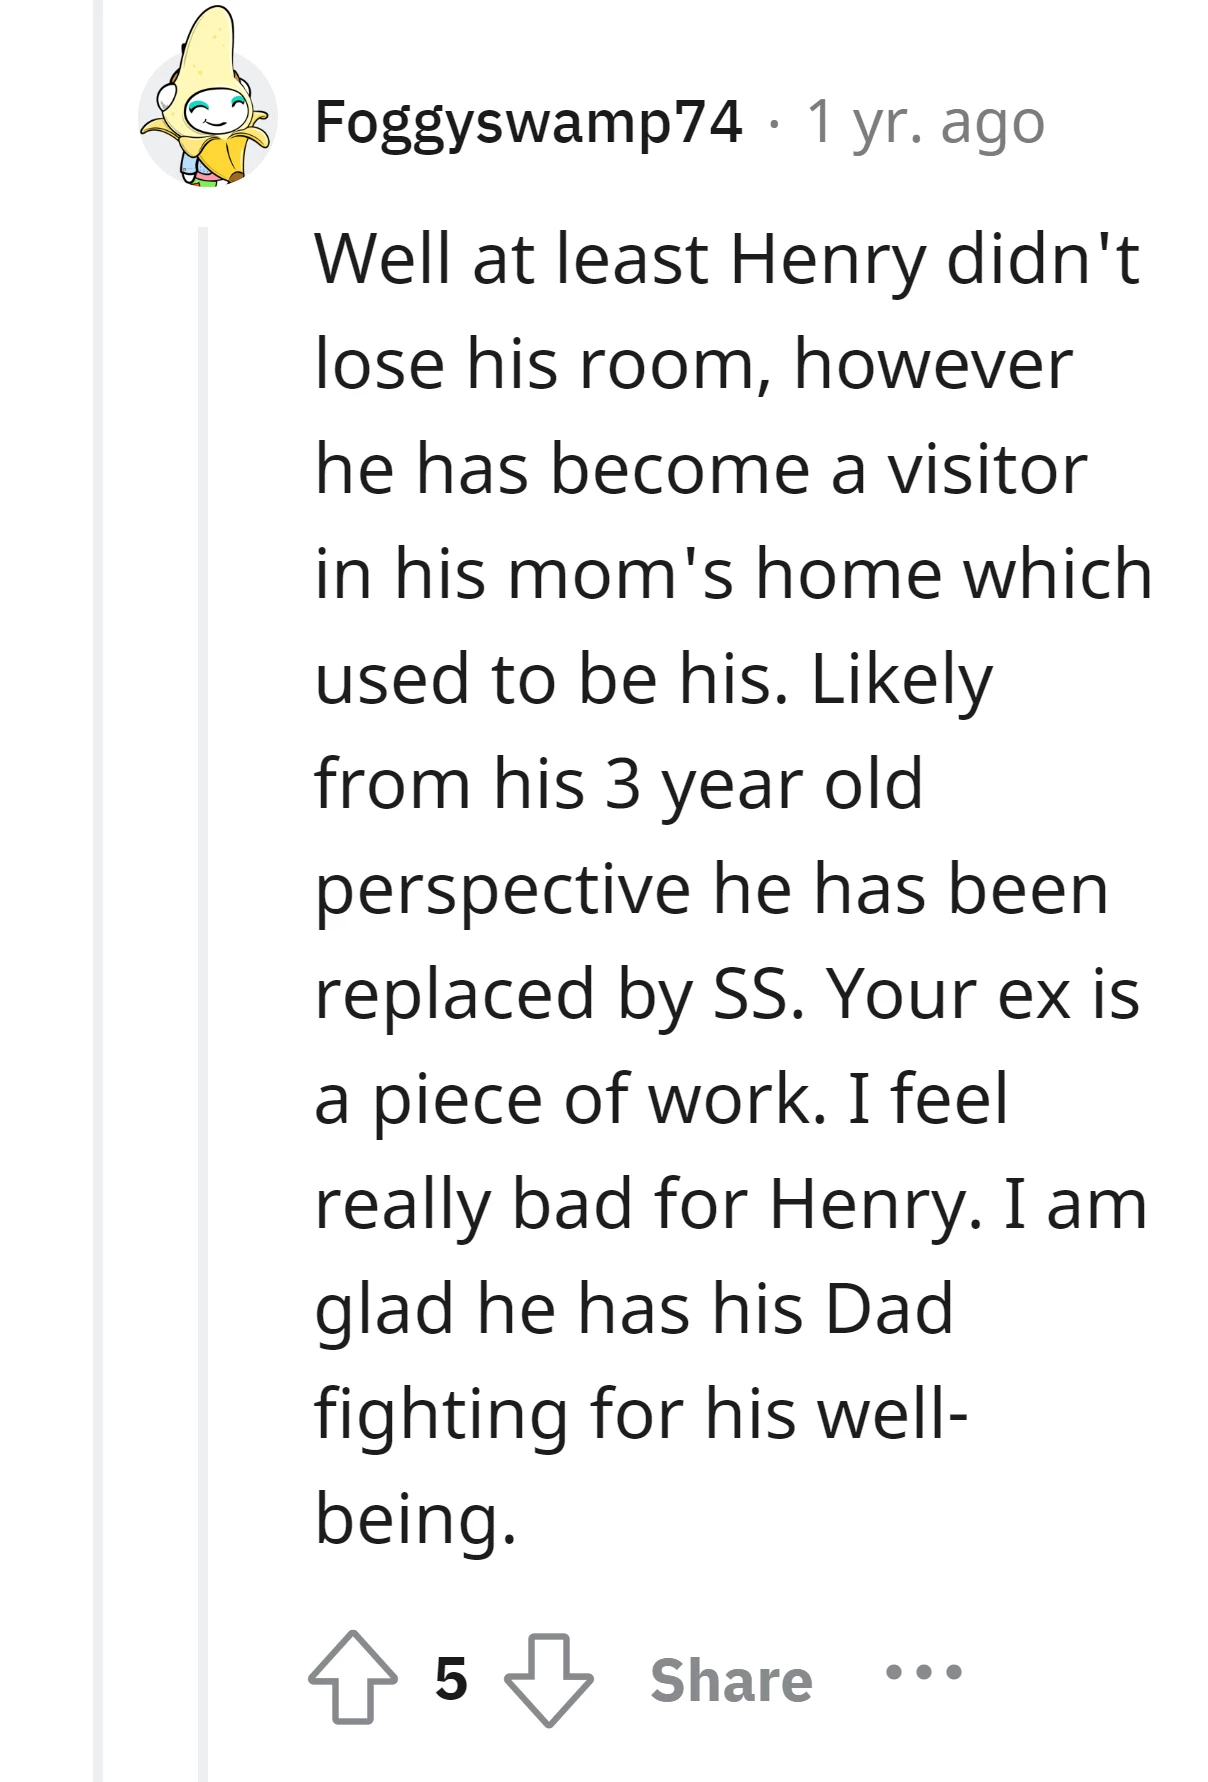 Luckily, he has his Dad fighting for his well-being